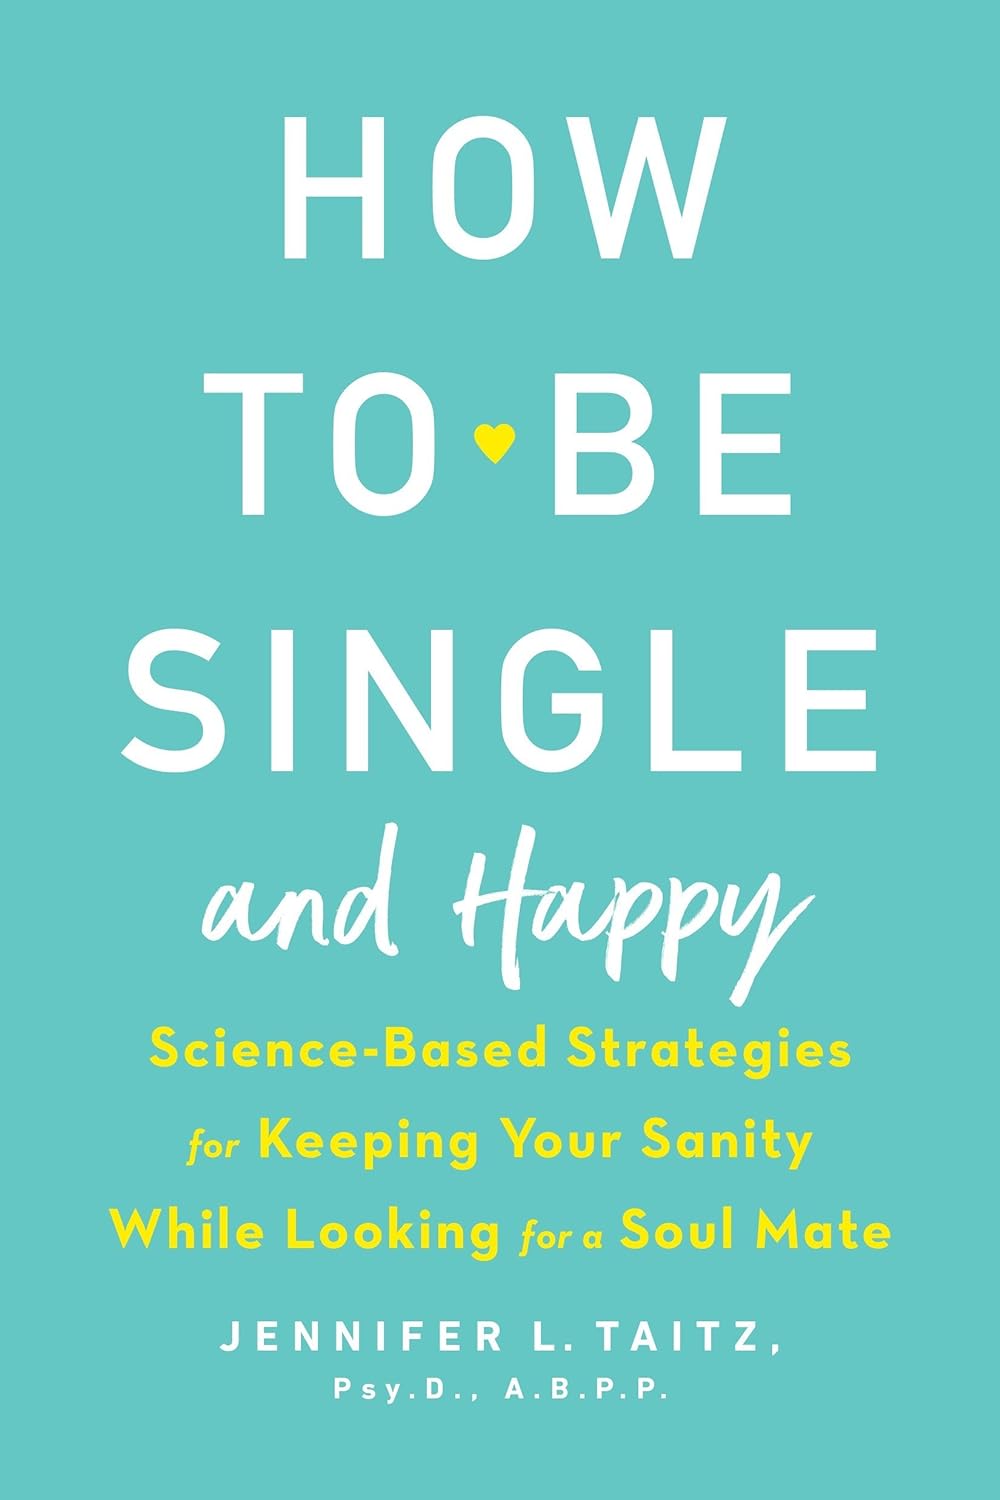 How to be Single and Happy, a book by Dr. Jenny Taitz